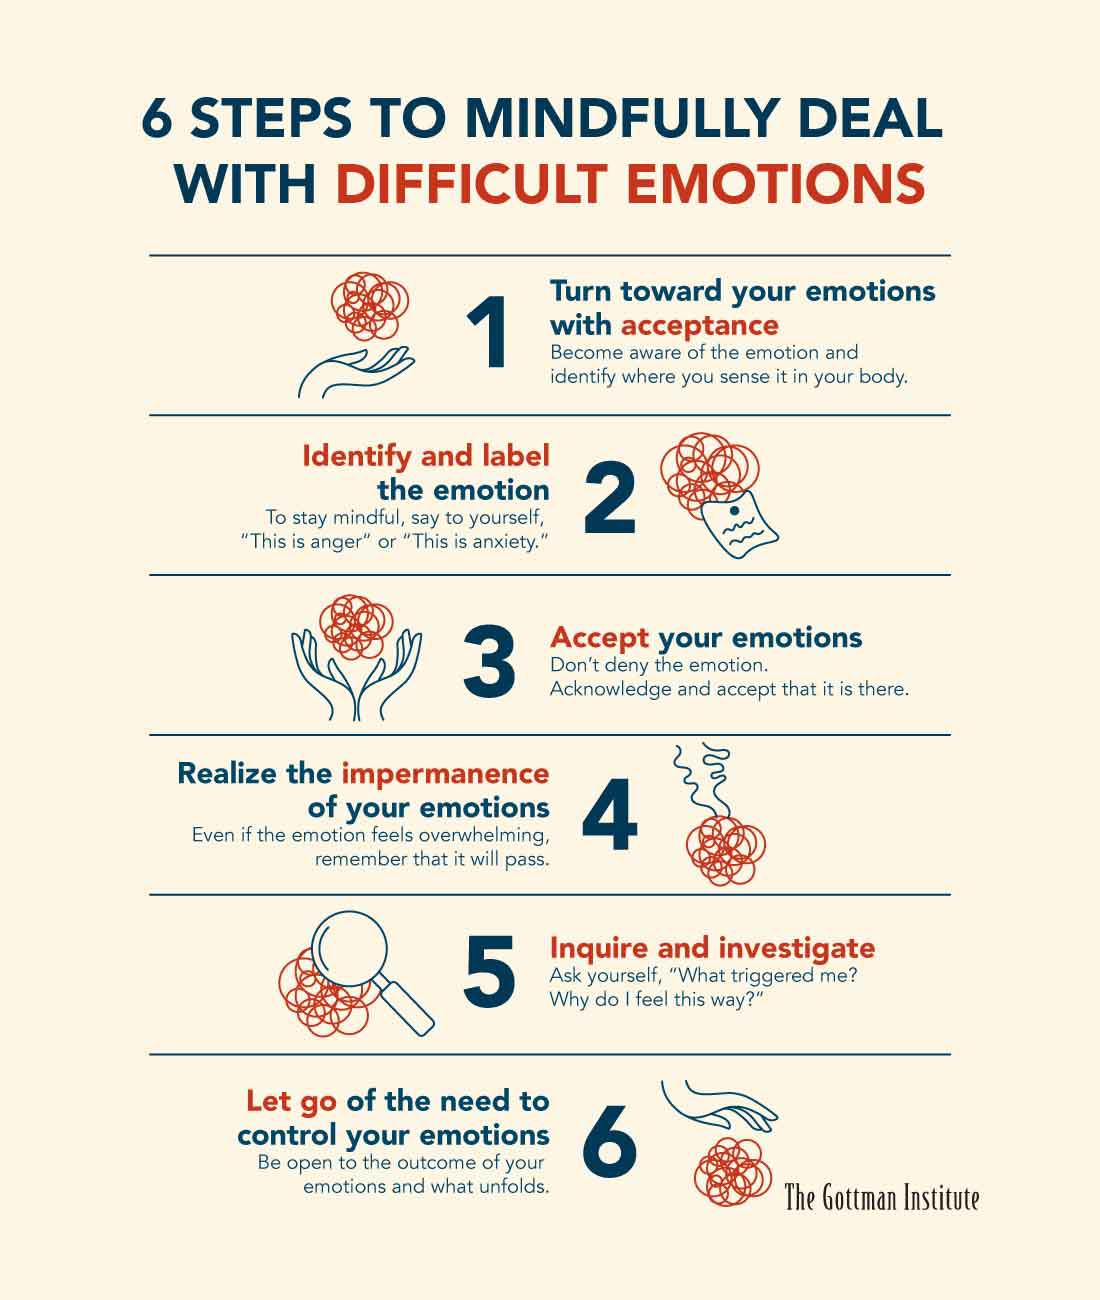 dealing with difficult emotions - 6 Steps To Mindfully Deal With Difficult Emotions 1 Turn toward your emotions with acceptance Become aware of the emotion and identify where you sense it in your body. Identify and label the emotion To stay mindful, say t